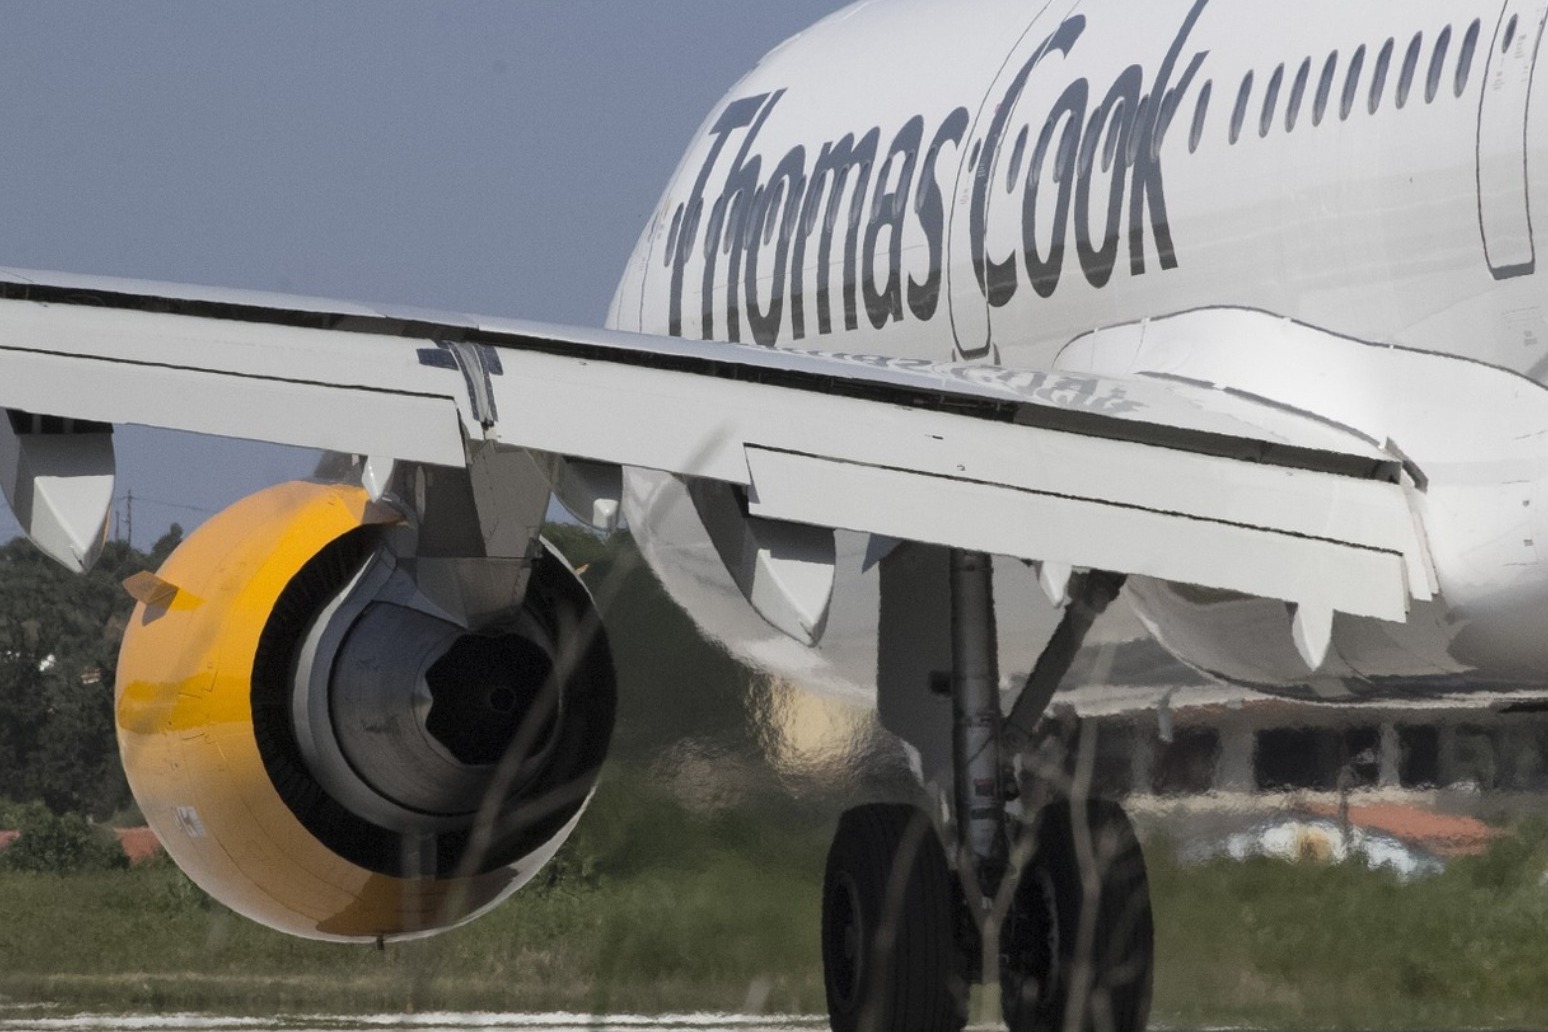 UK to repatriate 16,000 people on 4th day of Thomas Cook collapse 